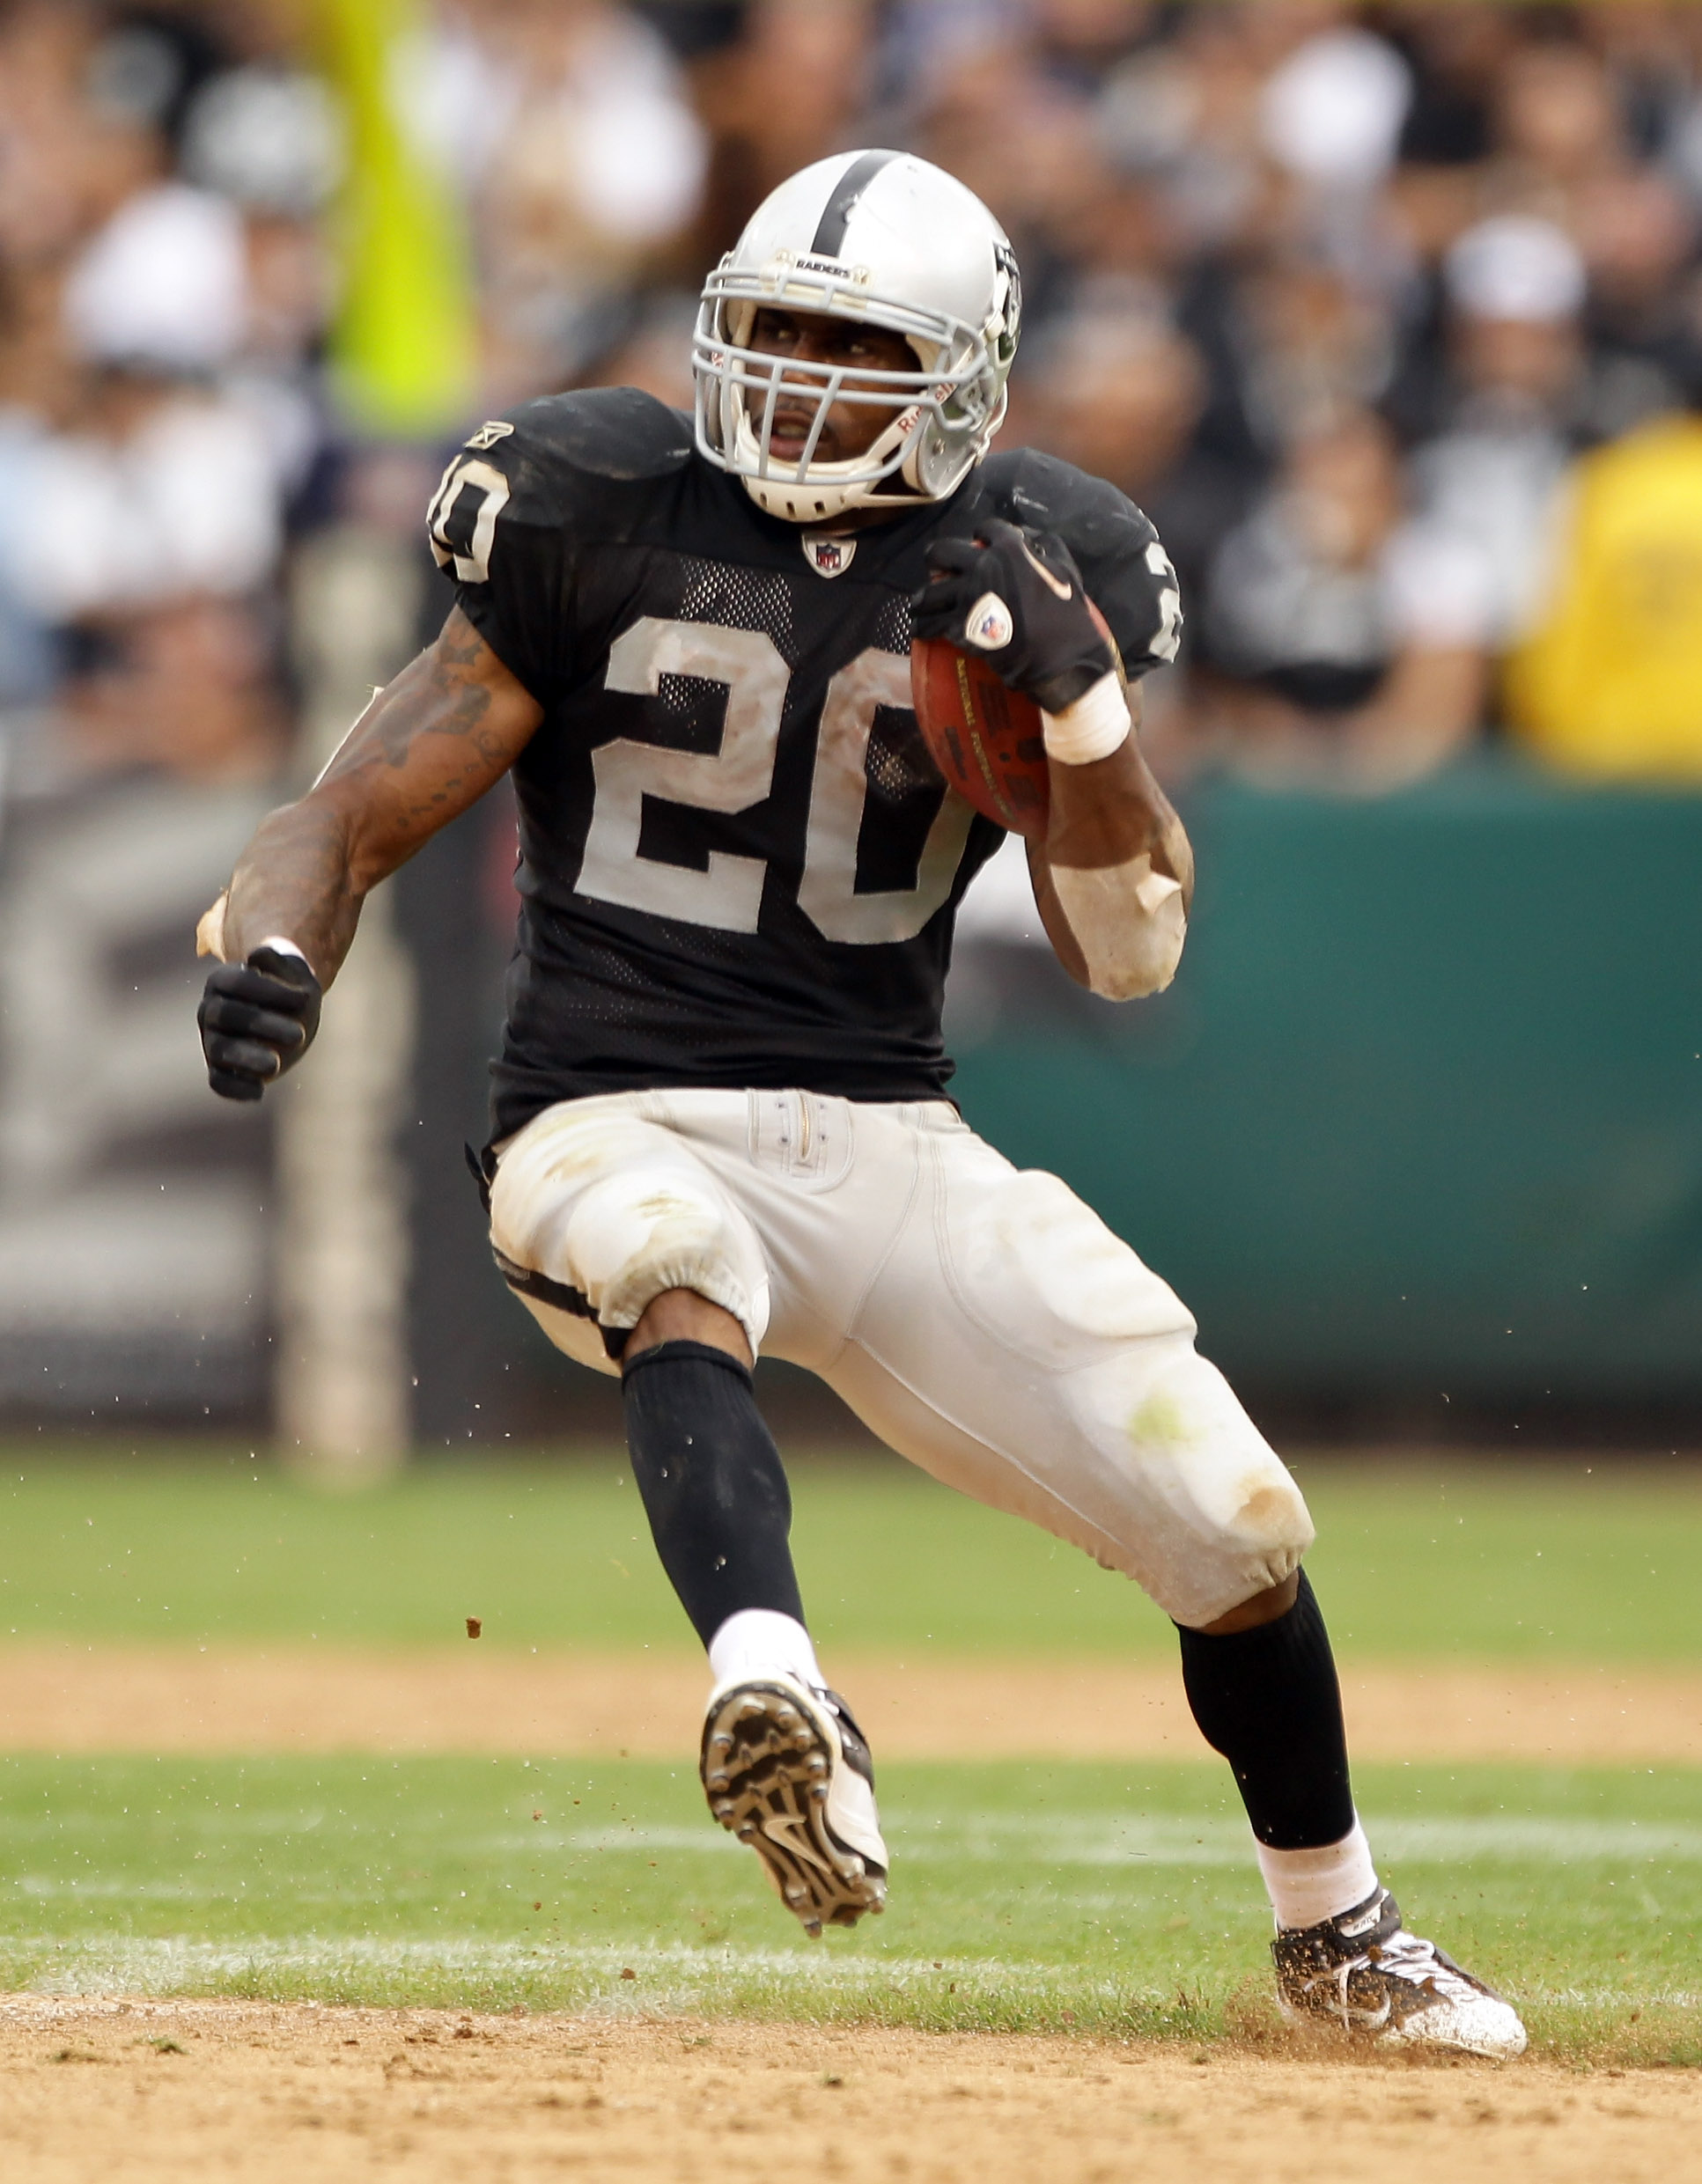 Darren McFadden is on his way to a career year.